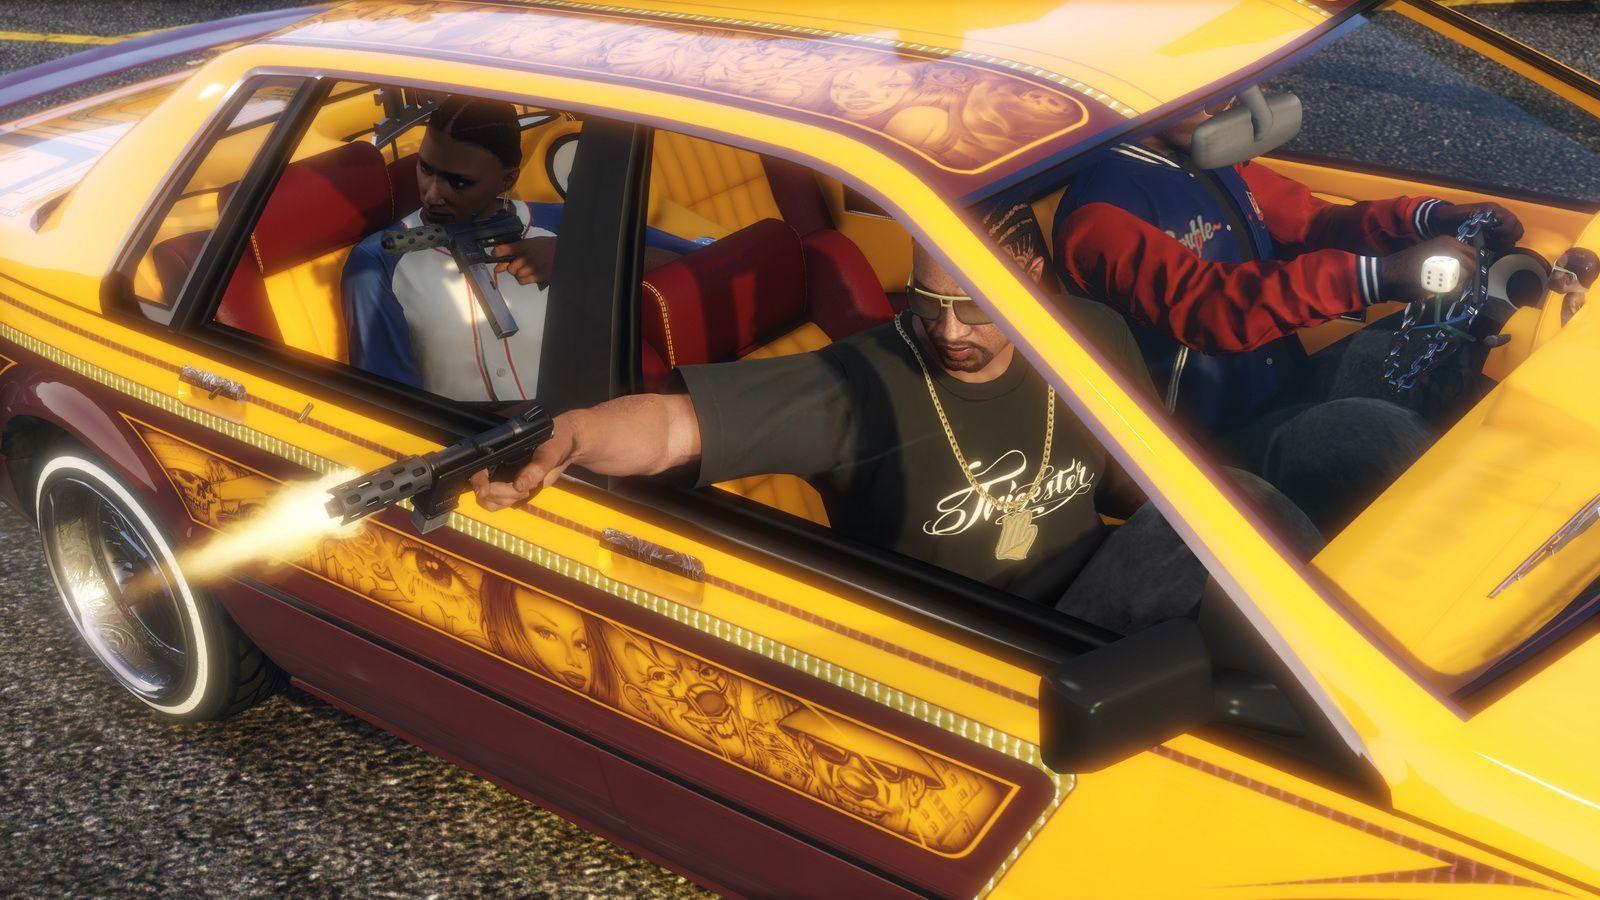 Latest Update Adds Lowriders To Grand Theft Auto 5